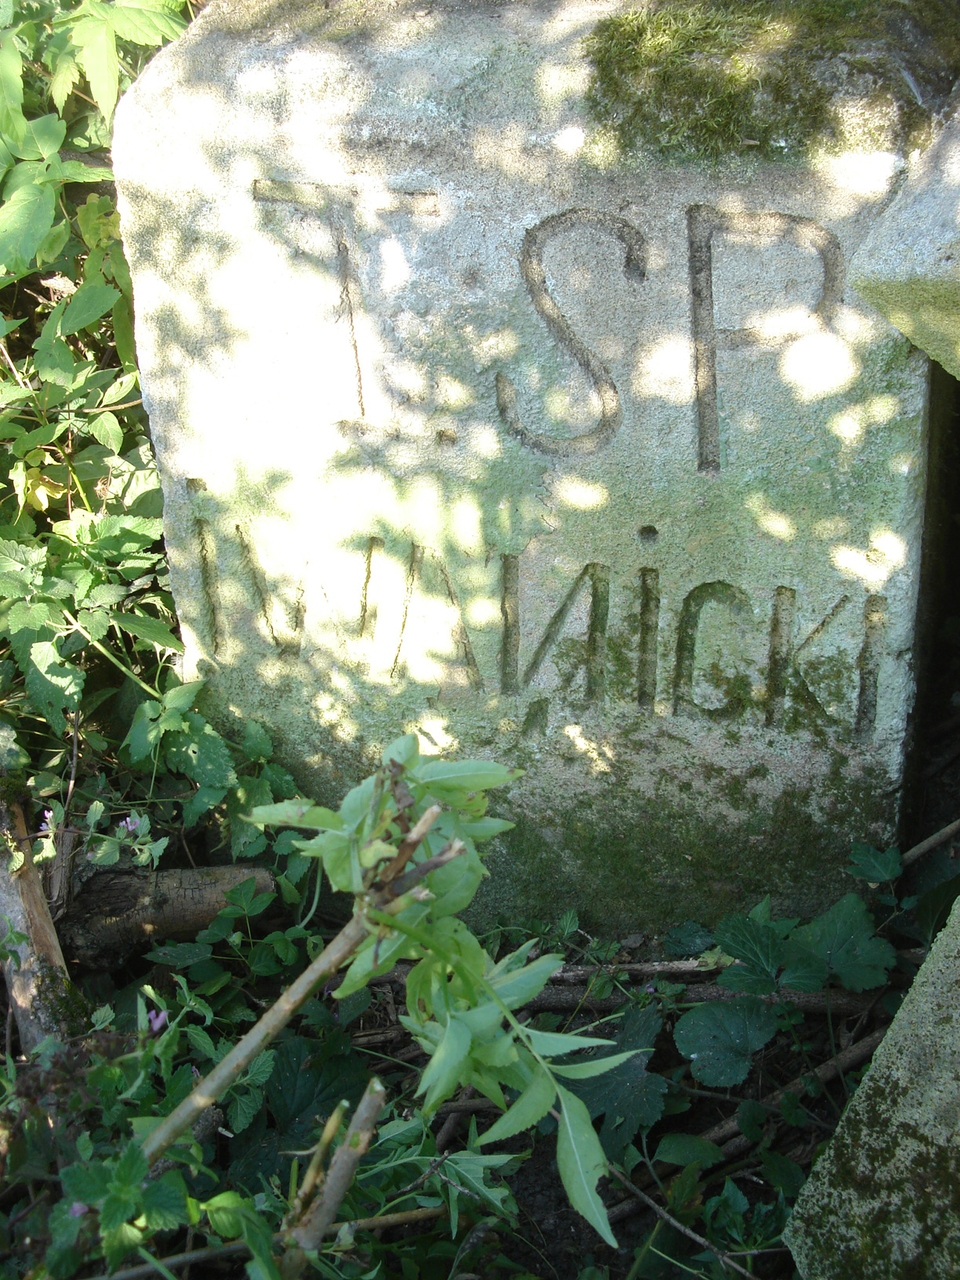 Tombstone of [...] Iwanicki, cemetery in Tłustý, state from 2008